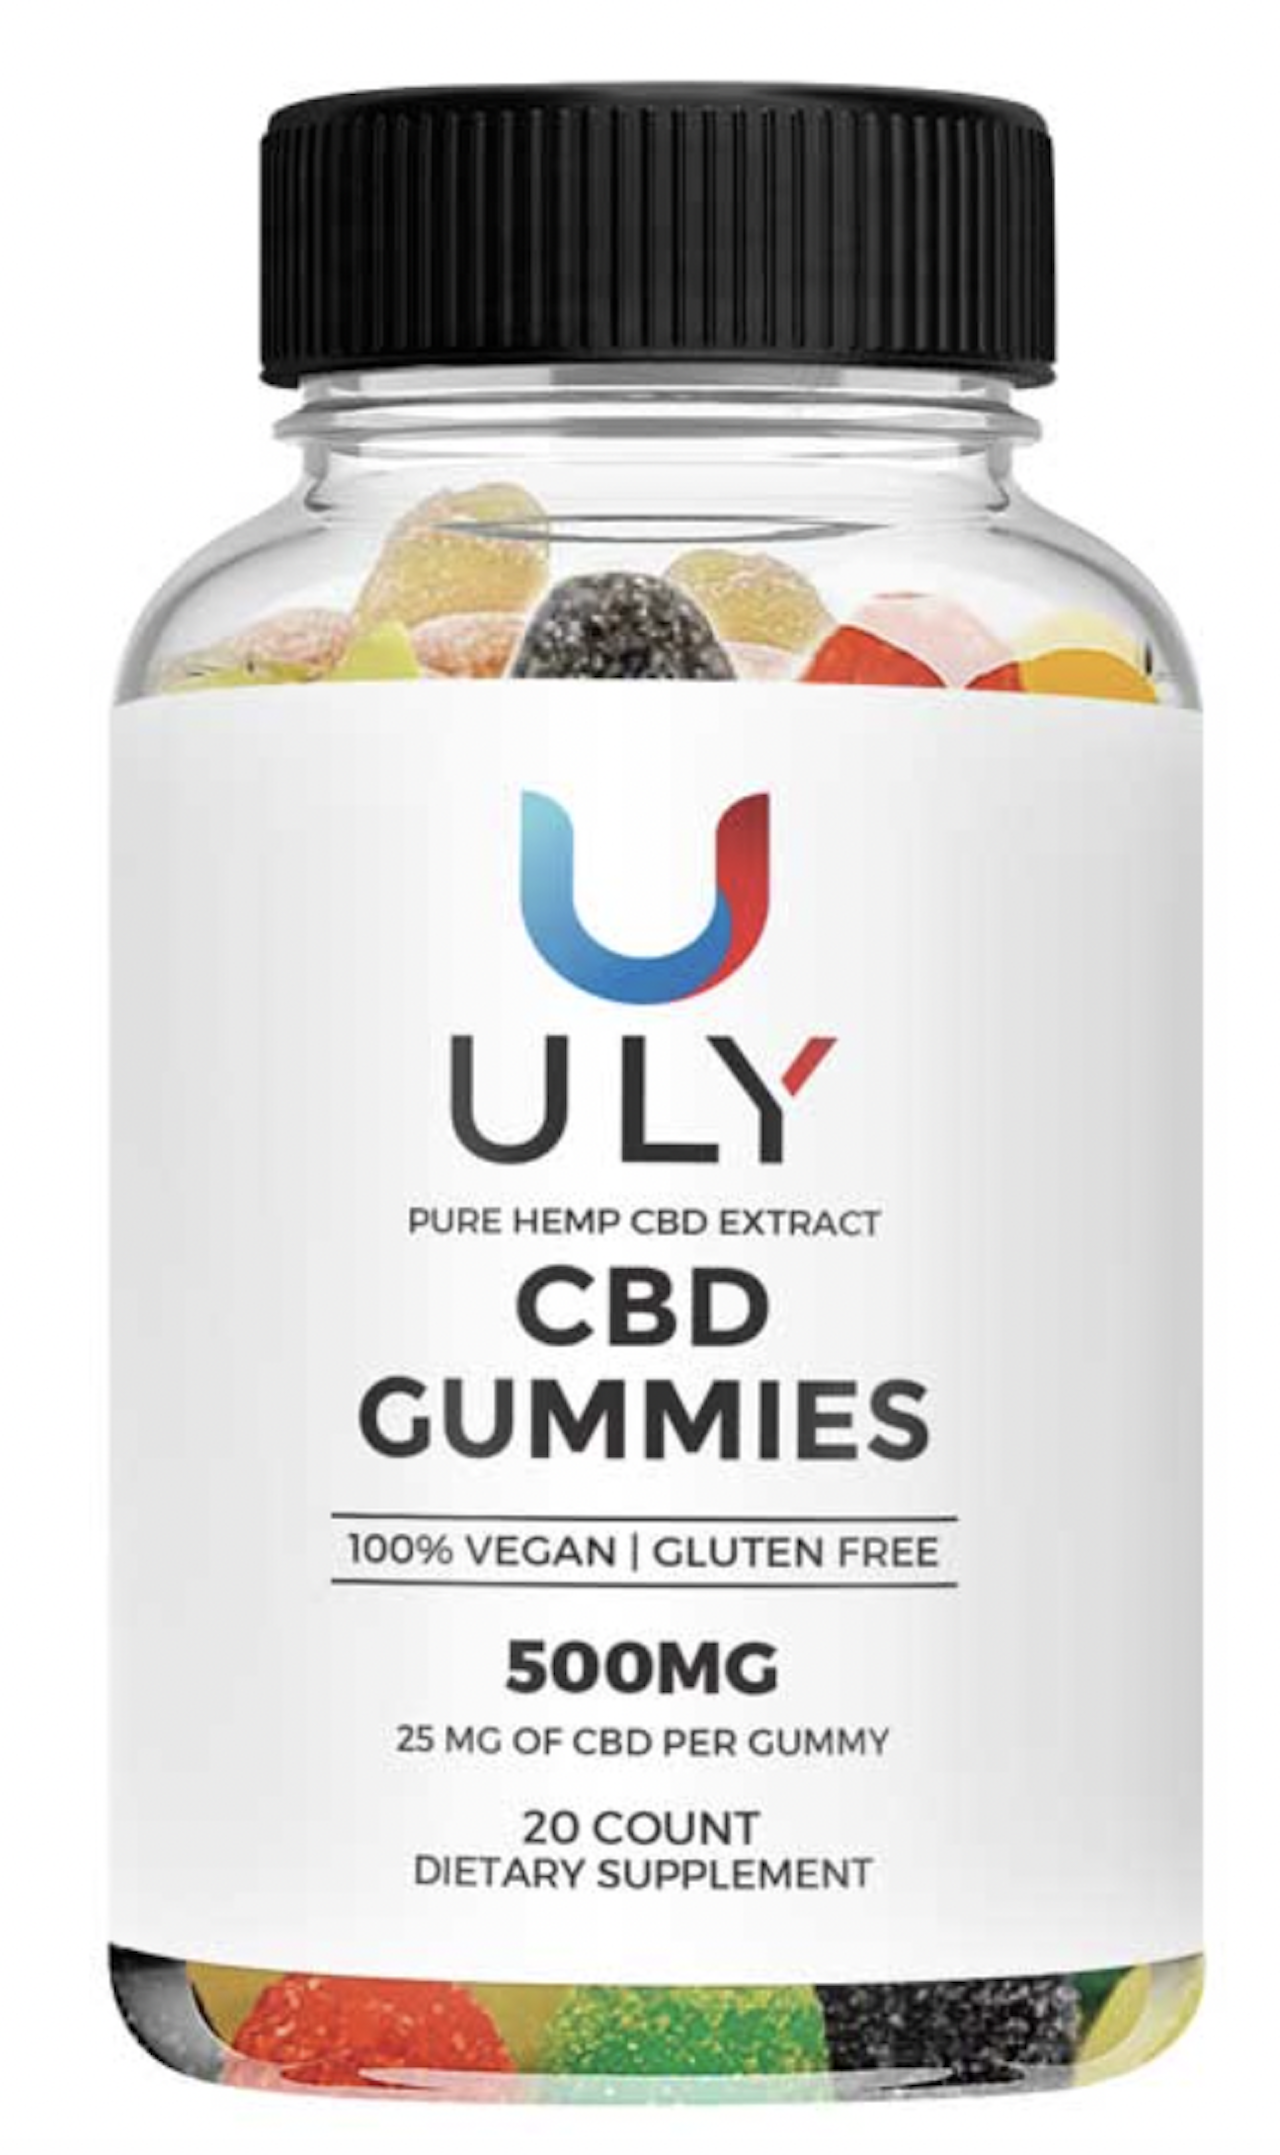 Uly Cbd Gummies reviews: Is it legitimate or a scam? Customers reveal the truth!